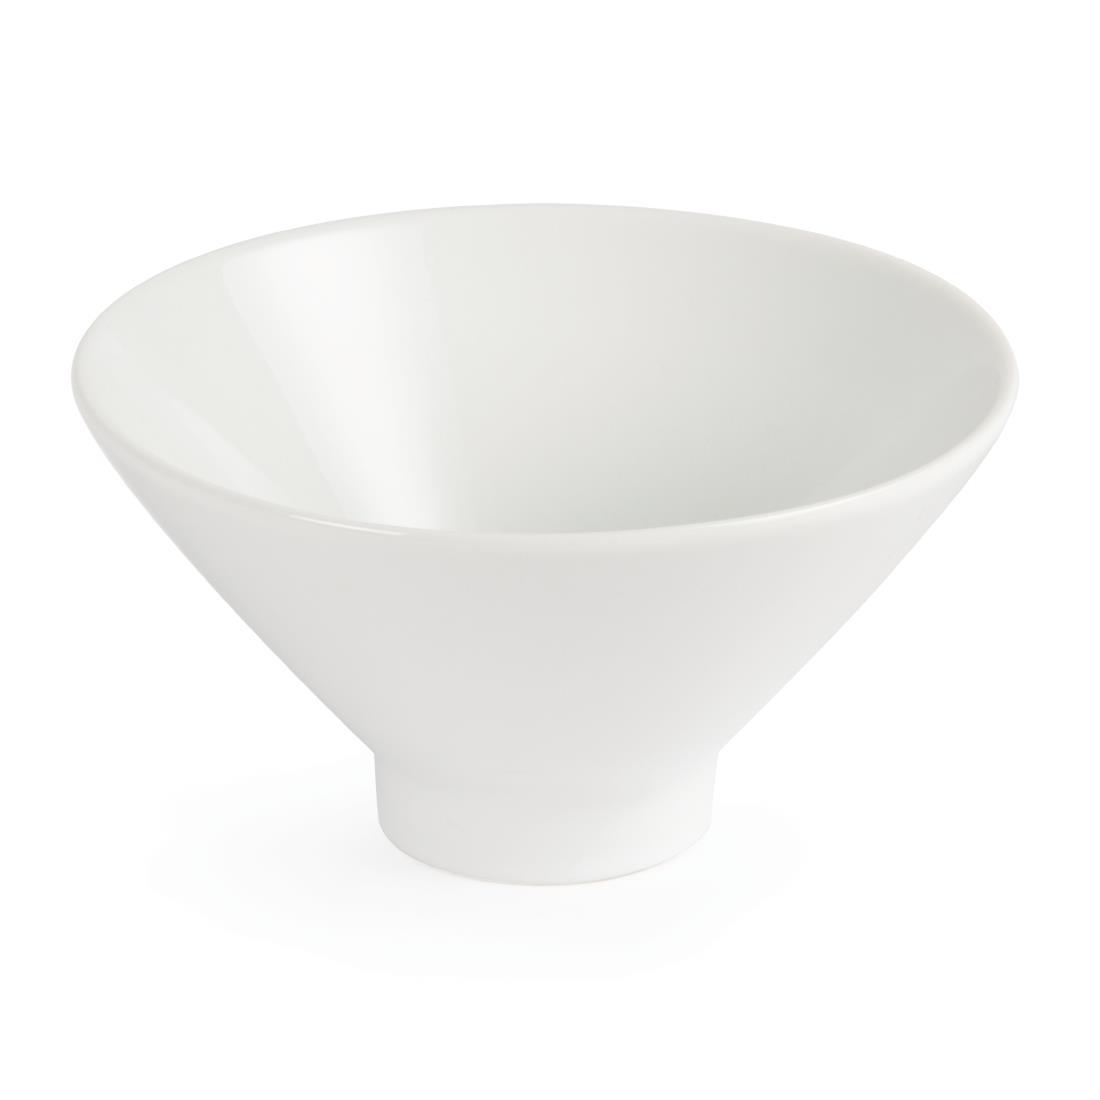 Olympia Whiteware Fluted Bowls 141mm (Pack of 4) - CB697  - 2